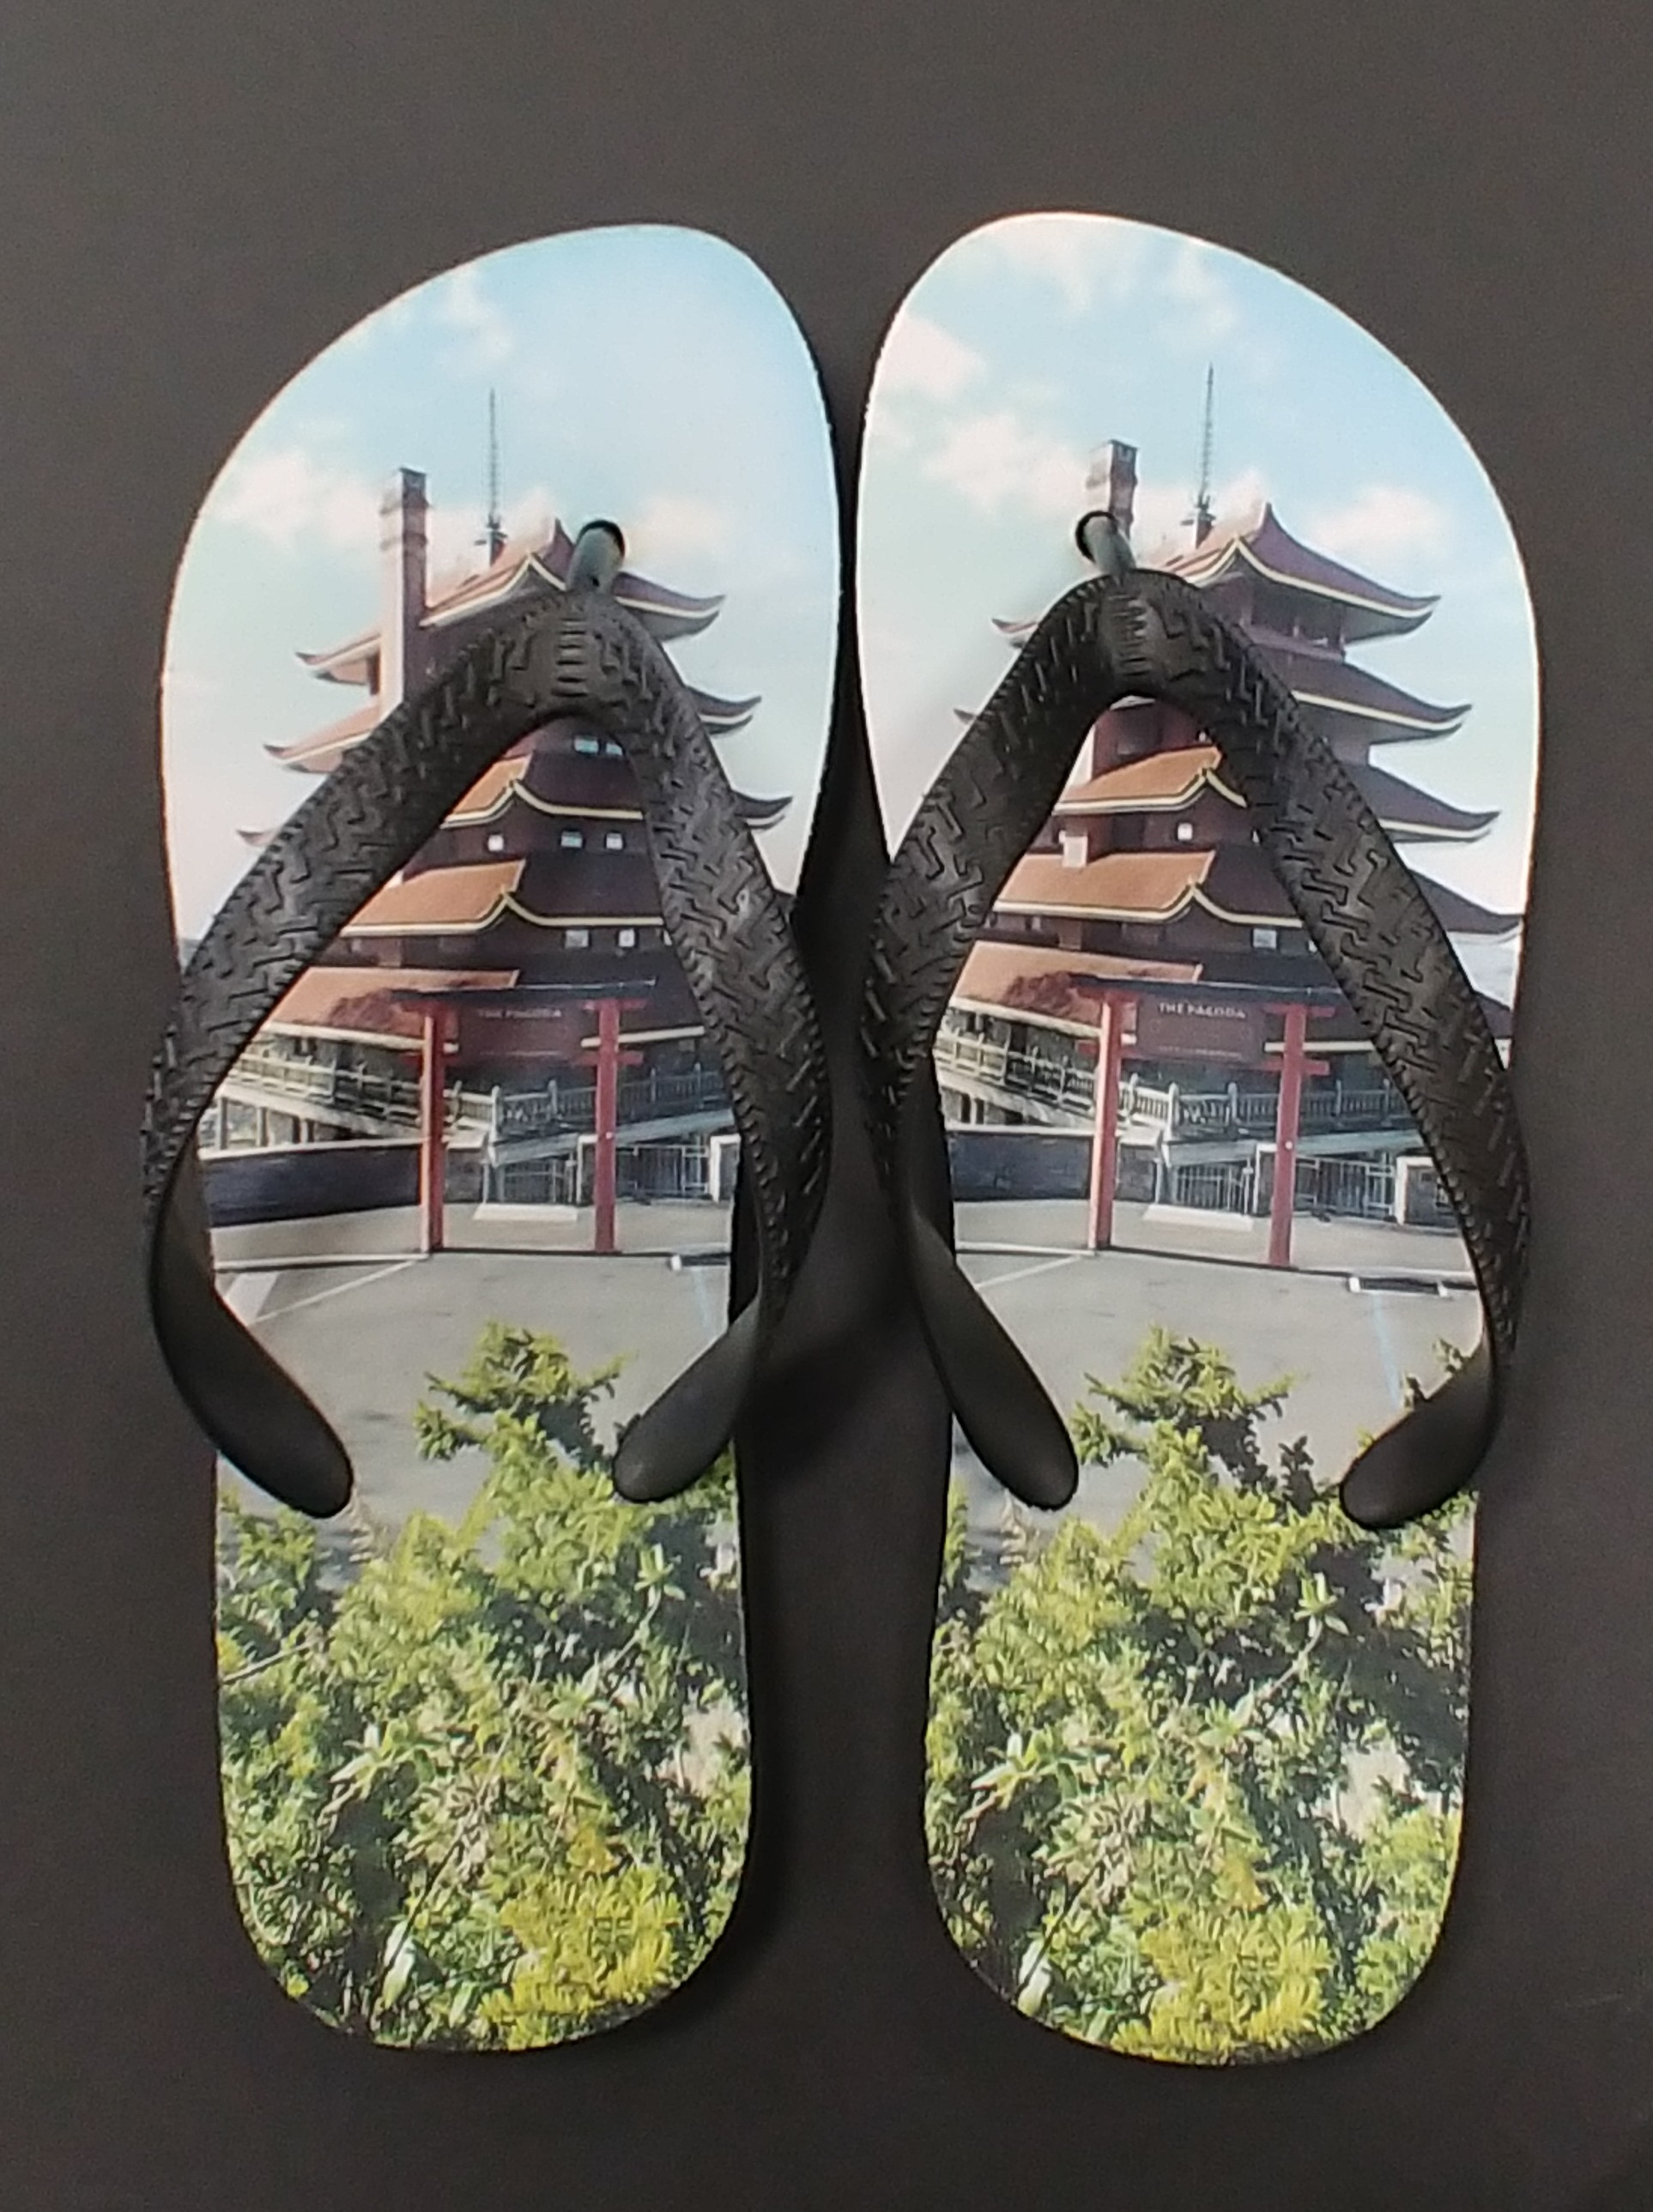 Reading Pa iconic Pagoda, that overlooks our city is printed on a pair of flip flops. They make